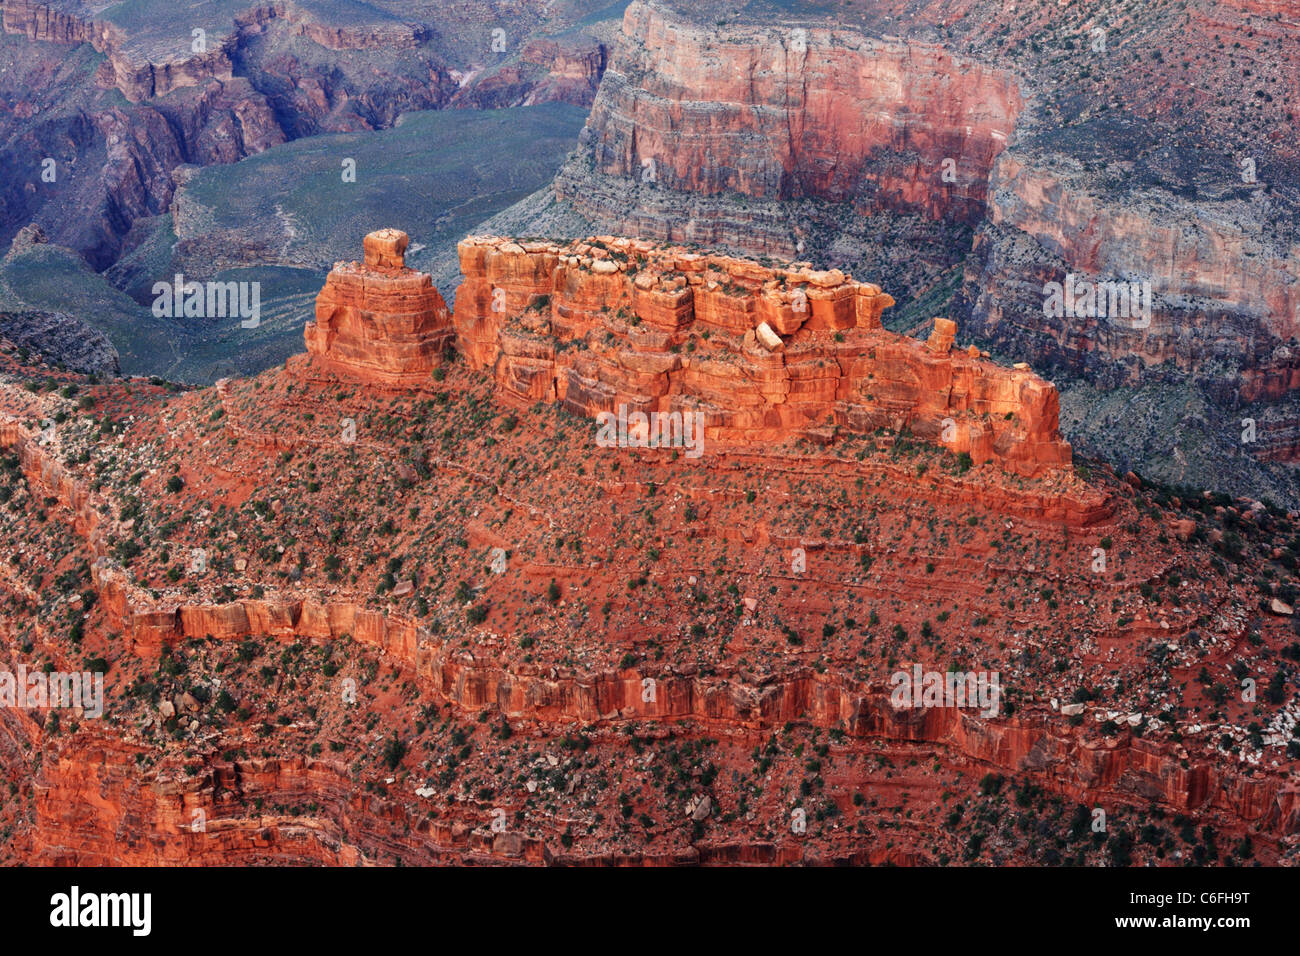 detail of battleship rock in the Grand Canyon Stock Photo